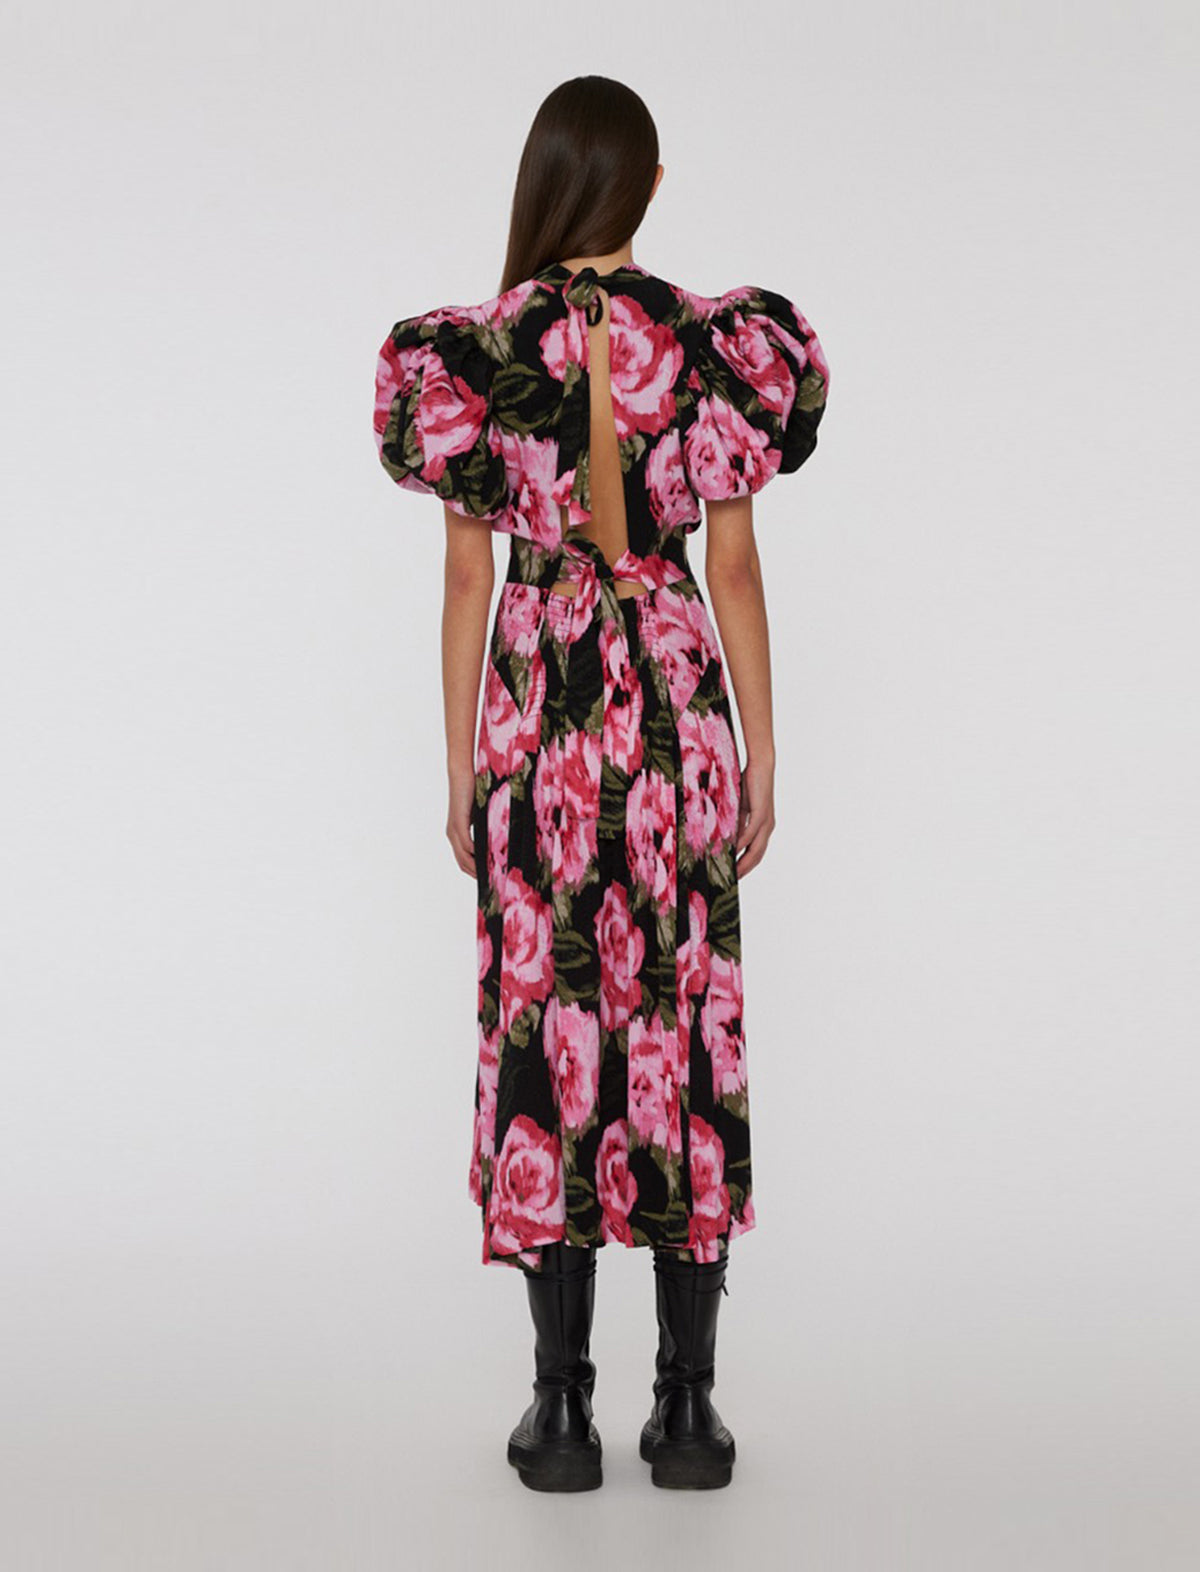 ROTATE BIRGER CHRISTENSEN Jacquard Noon Floral Dress in Black and Red